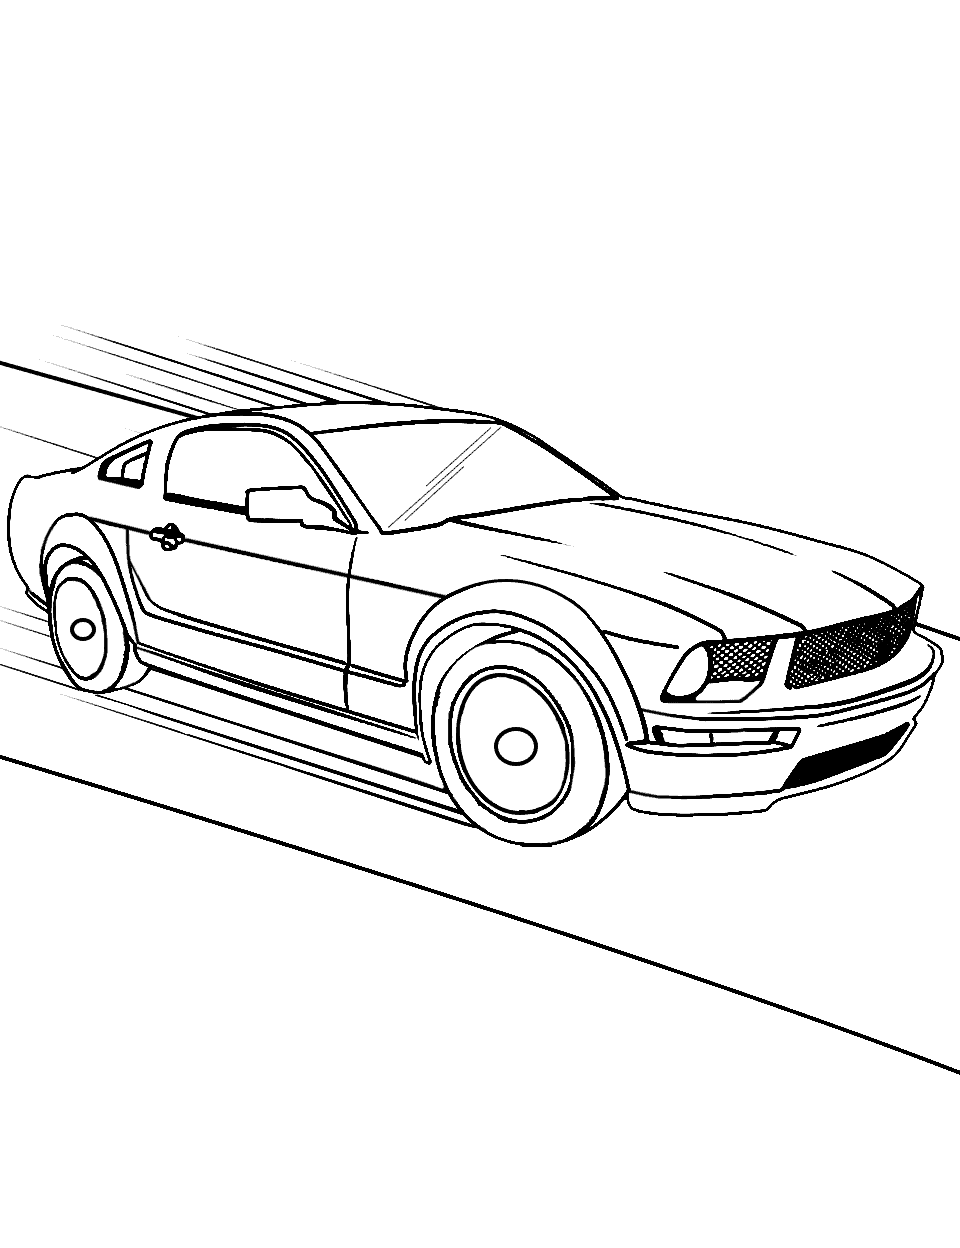 Fast Mustang Race Car Coloring Page - A Mustang race car zooming fast on a race track, showing motion blur.